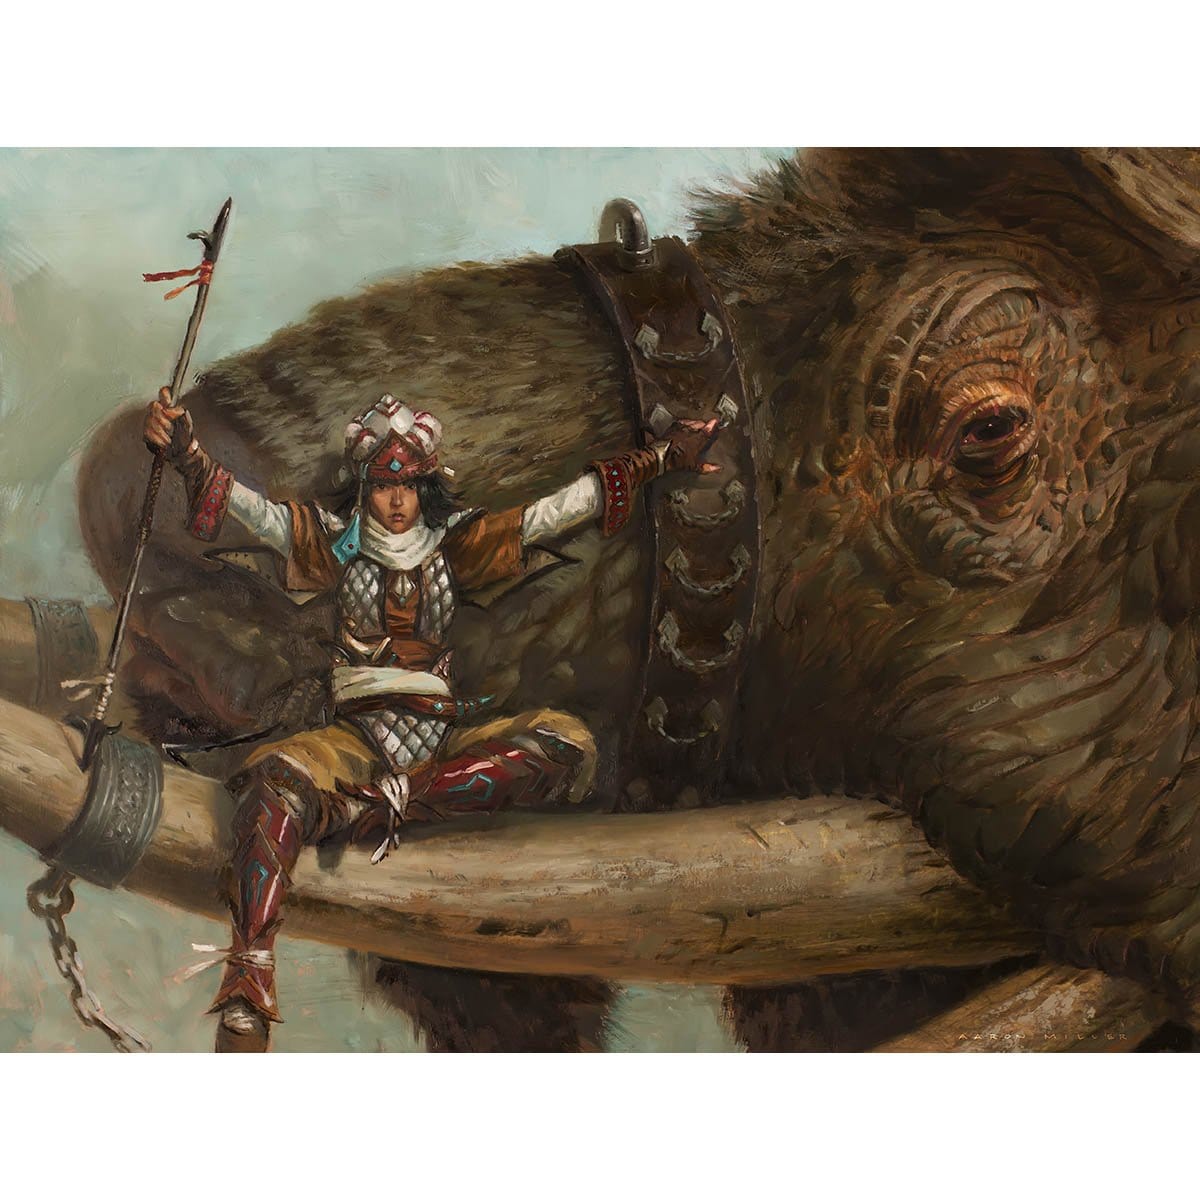 Tuskguard Captain Print - Print - Original Magic Art - Accessories for Magic the Gathering and other card games